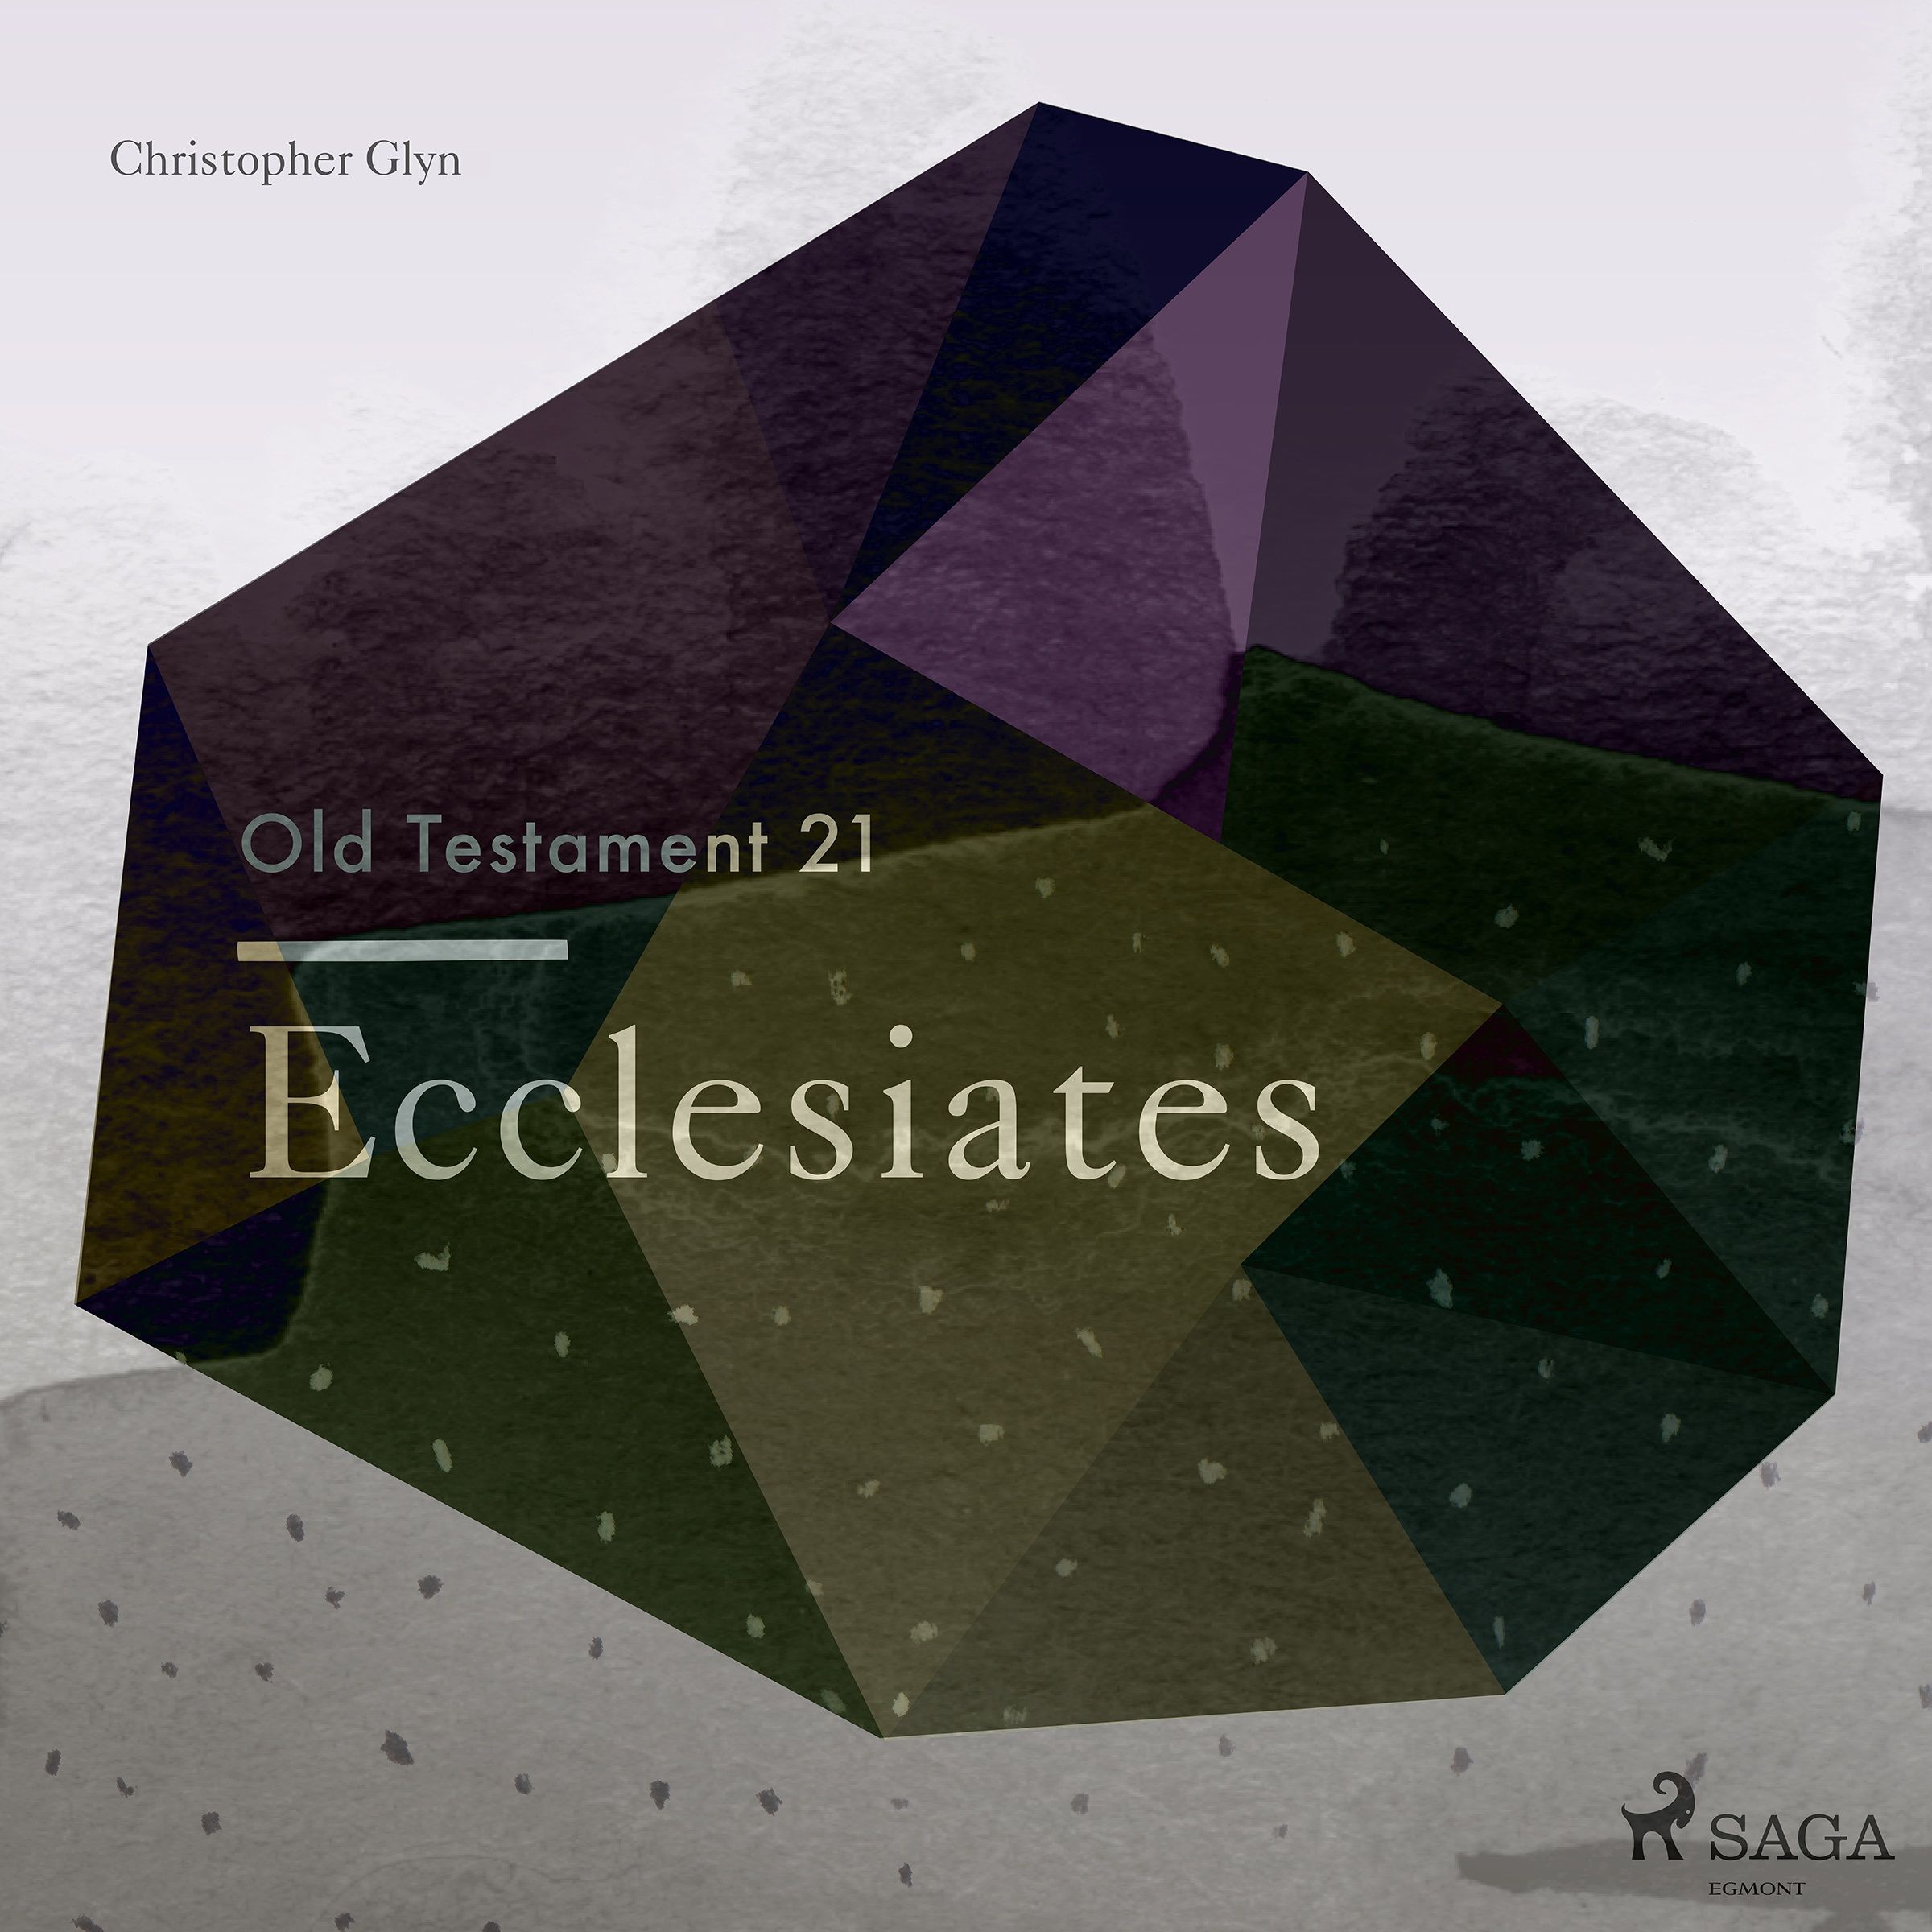 The Old Testament 21 - Ecclesiates, audiobook by Christopher Glyn